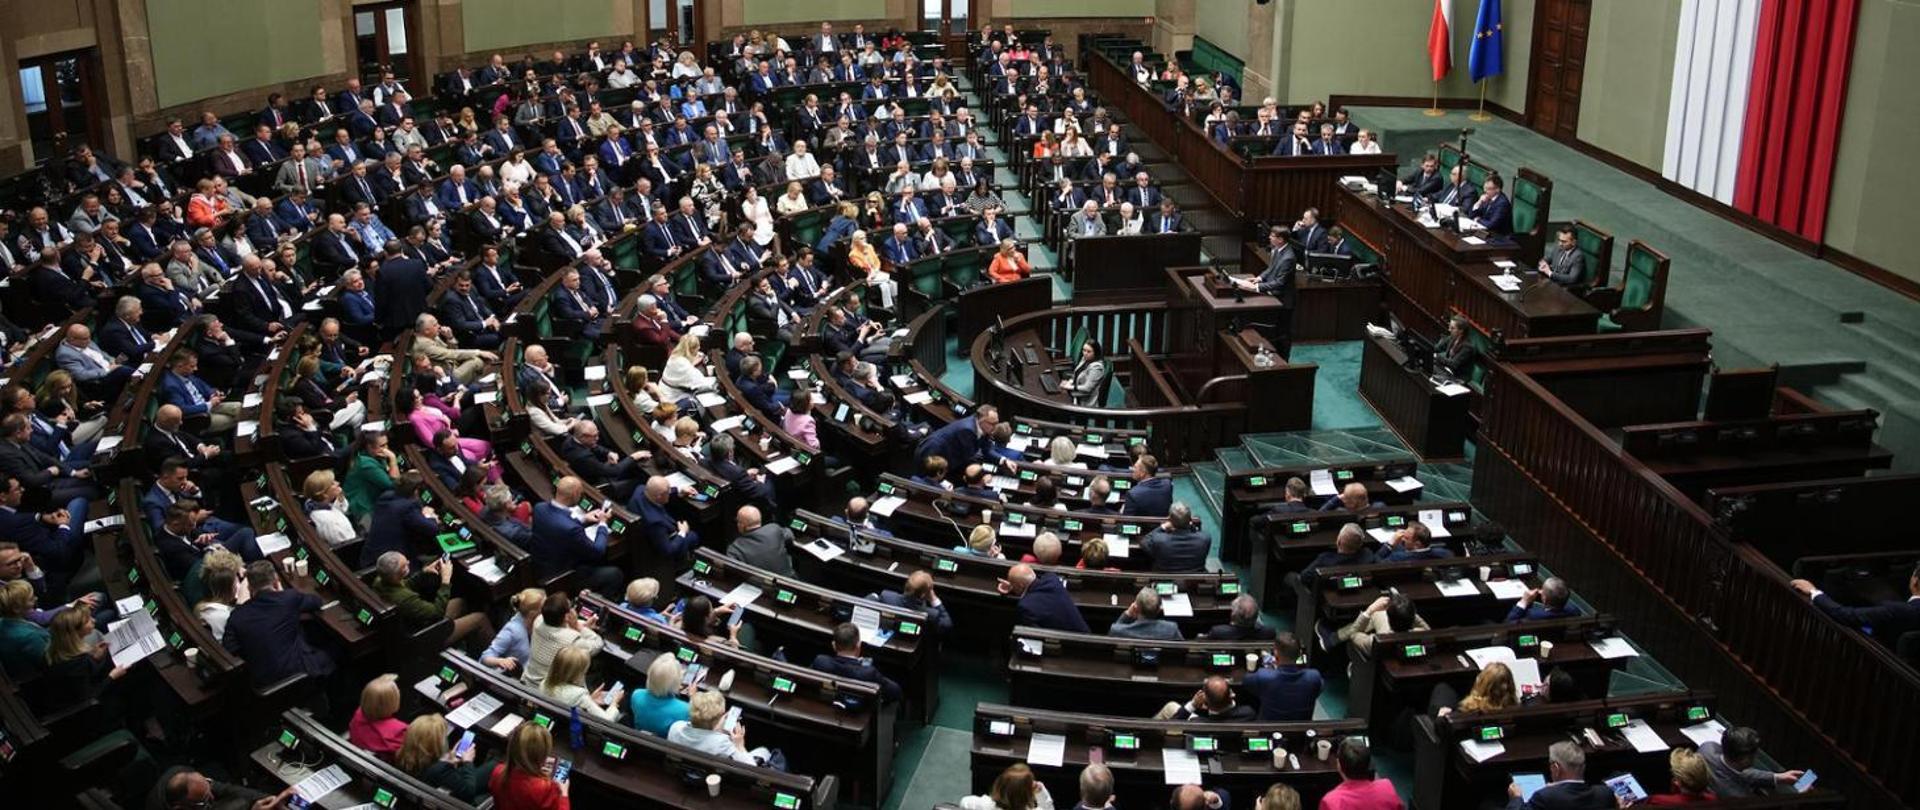 The Sejm (Polish Parliament) has adopted the law on whistleblowers